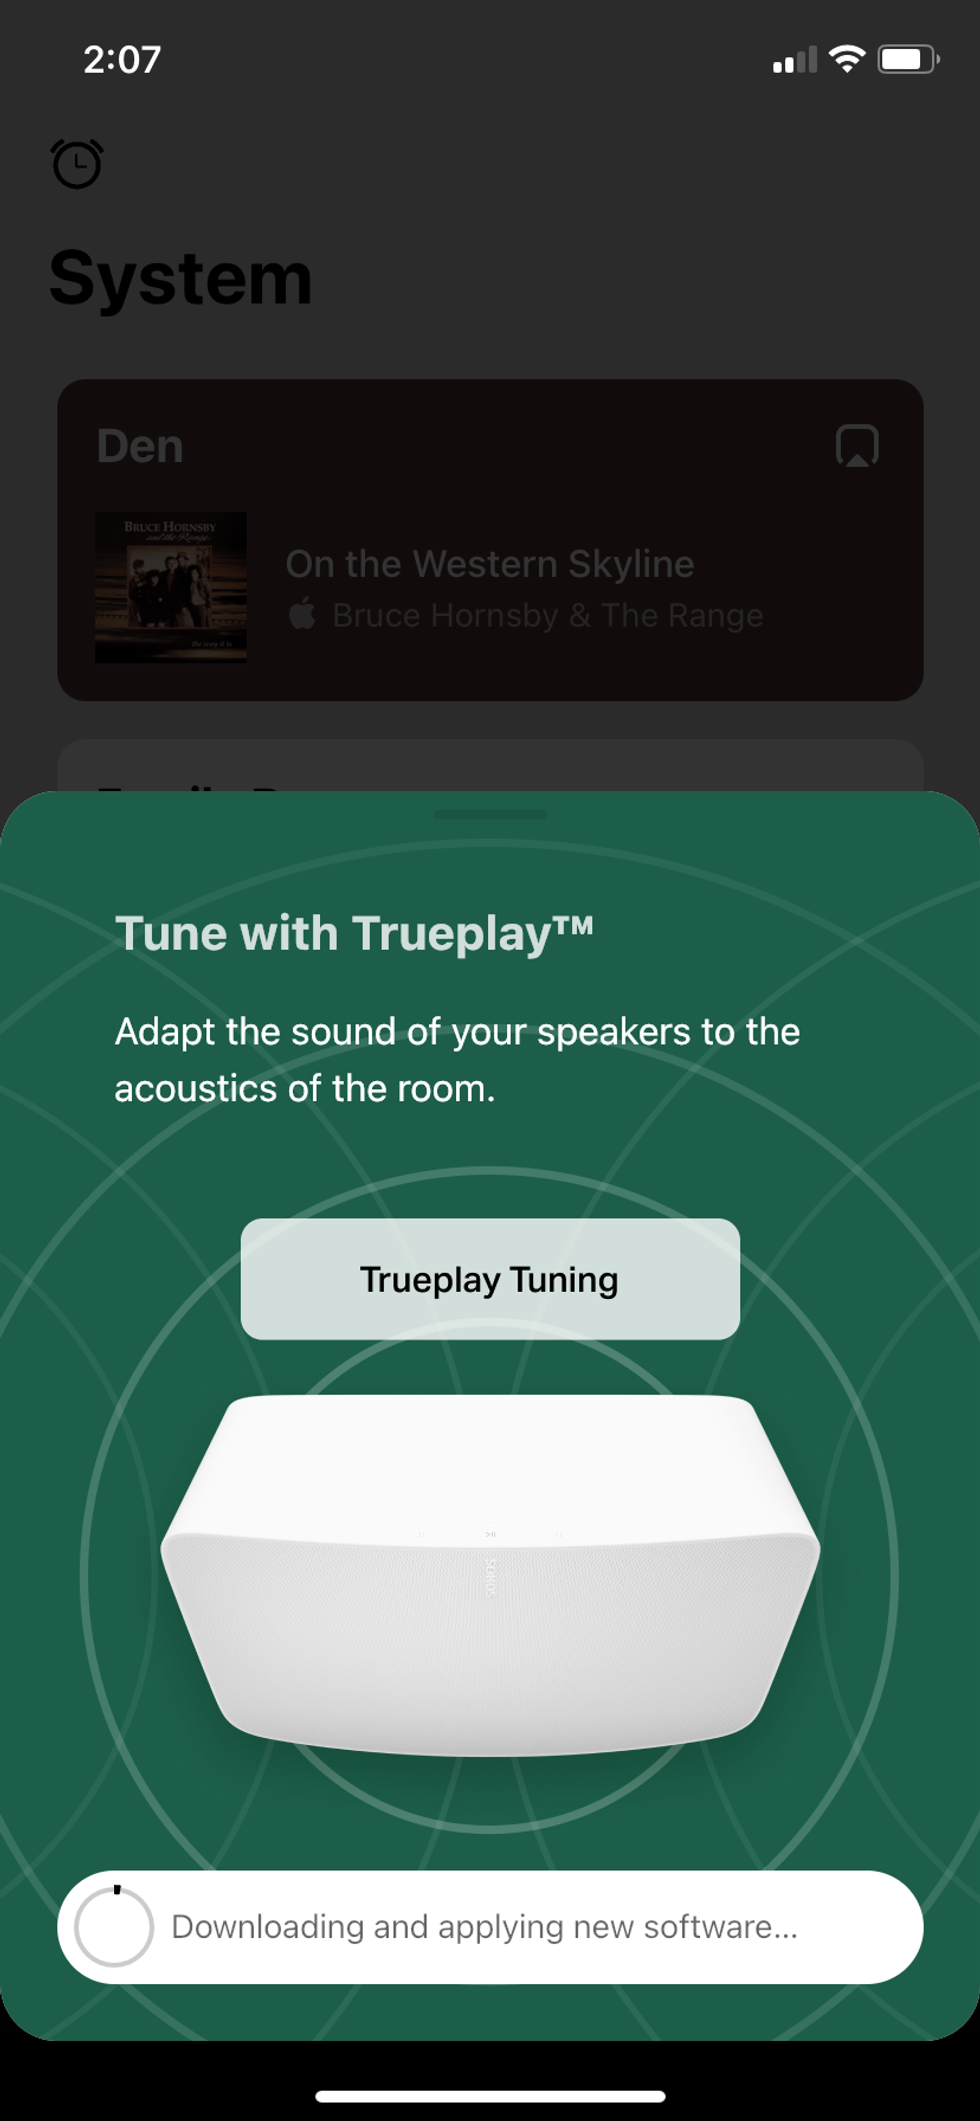 a screenshot of Tune to Trudplay feature in Sonos app